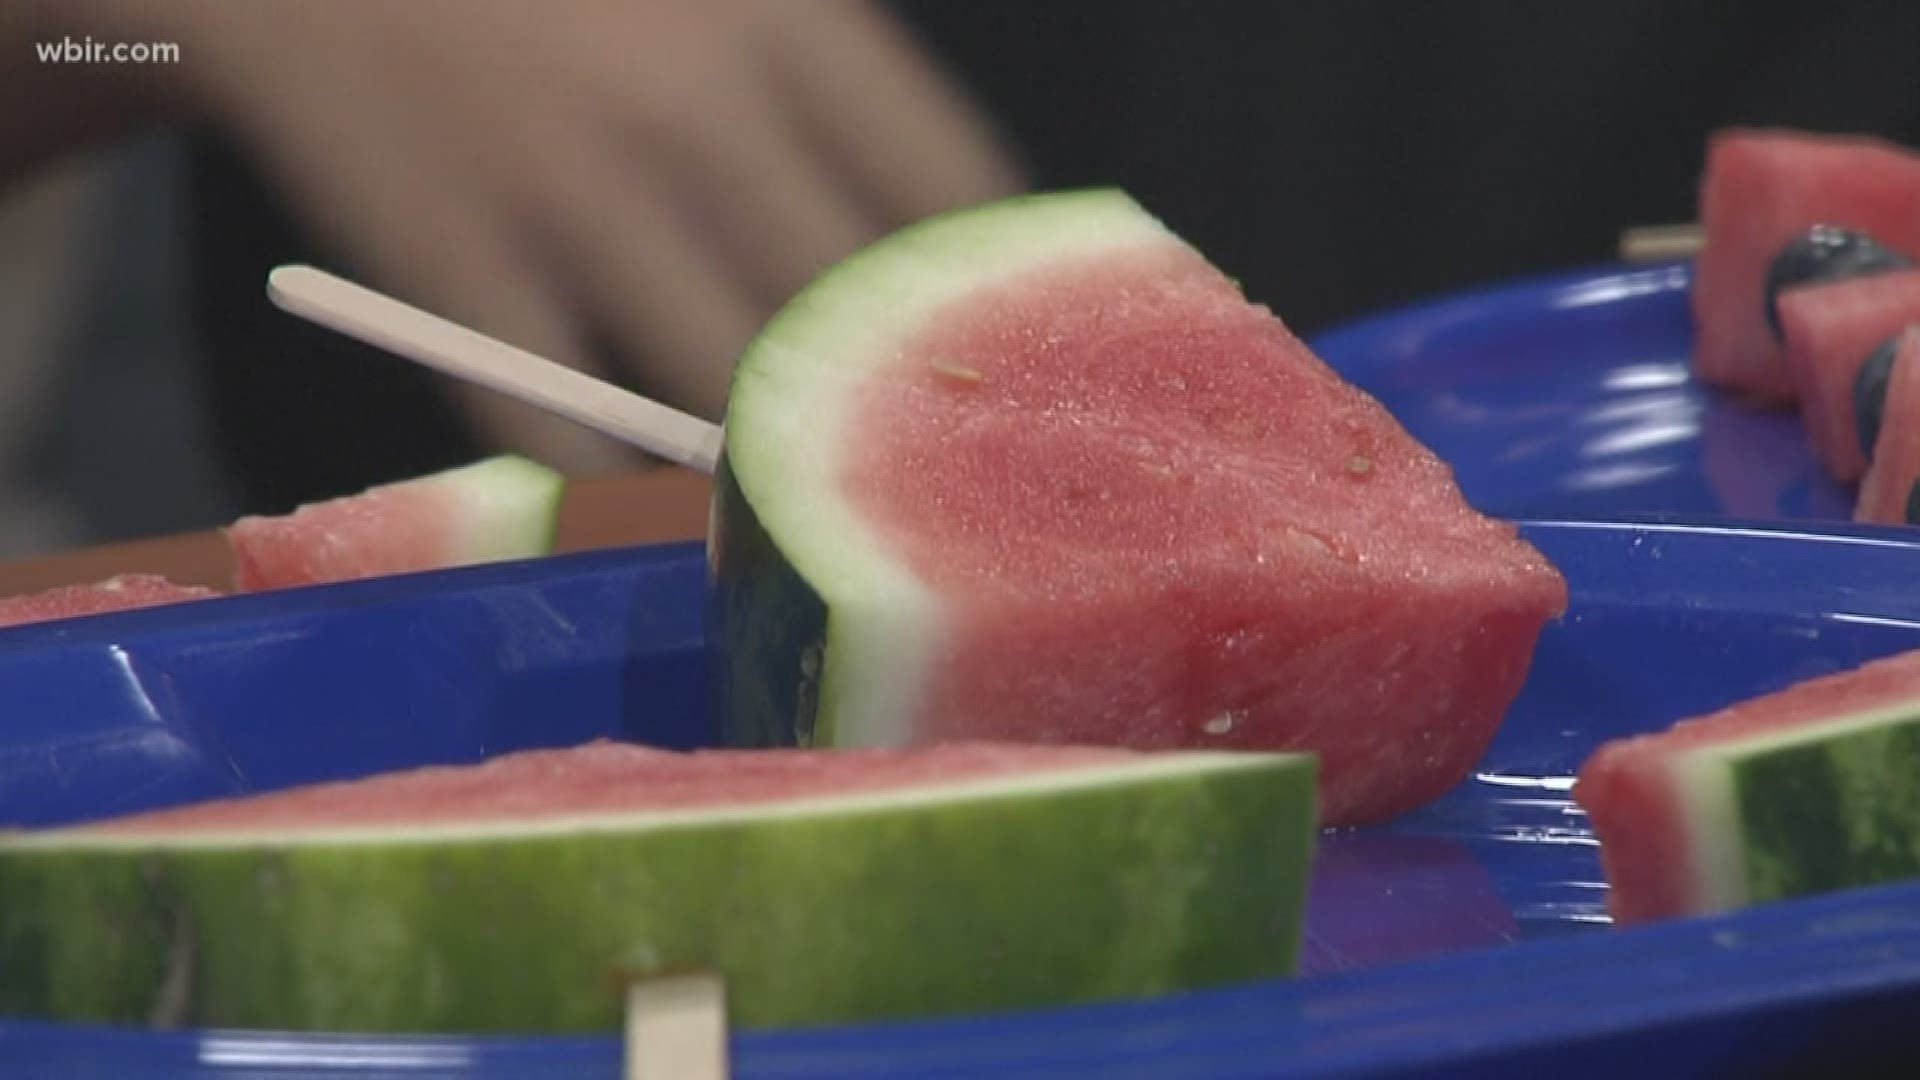 we are joined in the kitchen with UT dietician Janet Seiber and her son Cooper. They are going to show us how to make some different watermelon treats for the summer.